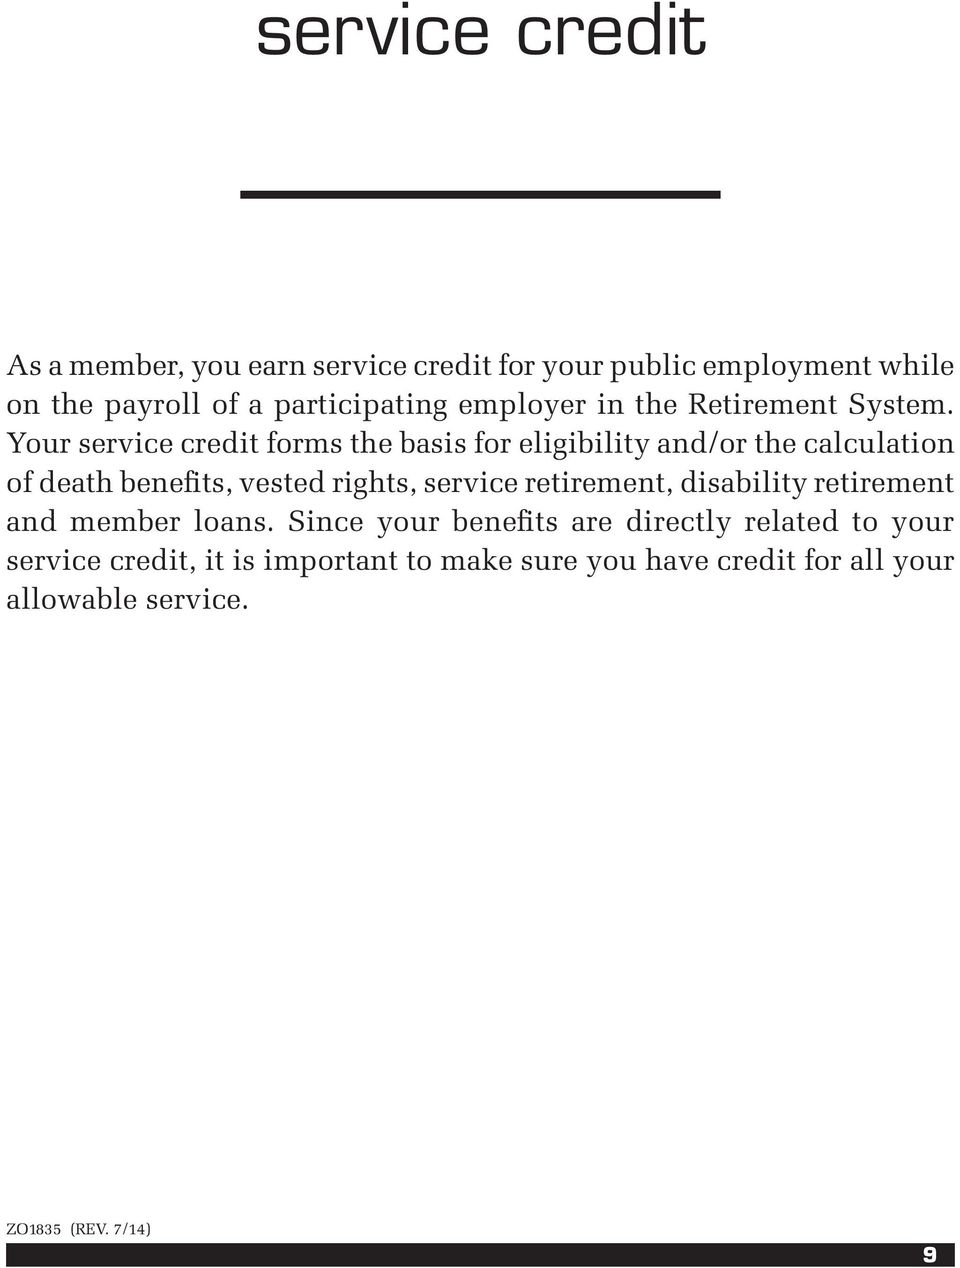 Your service credit forms the basis for eligibility and/or the calculation of death benefits, vested rights, service